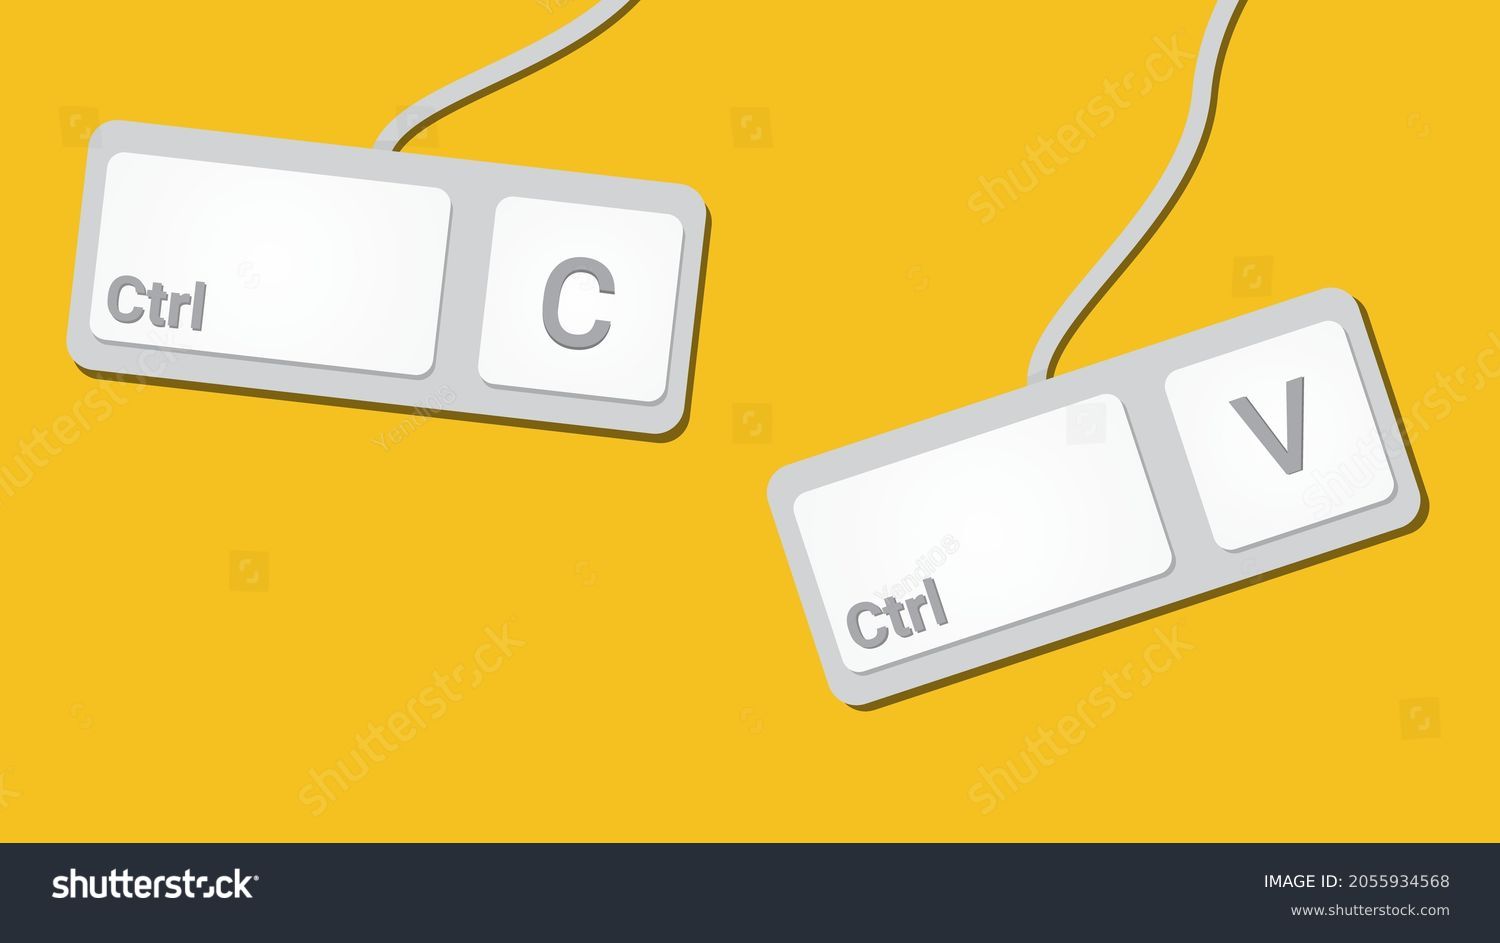 keyboard keys Ctrl C and Ctrl V, copy and paste the key shortcuts. Computer icon on yellow background #2055934568